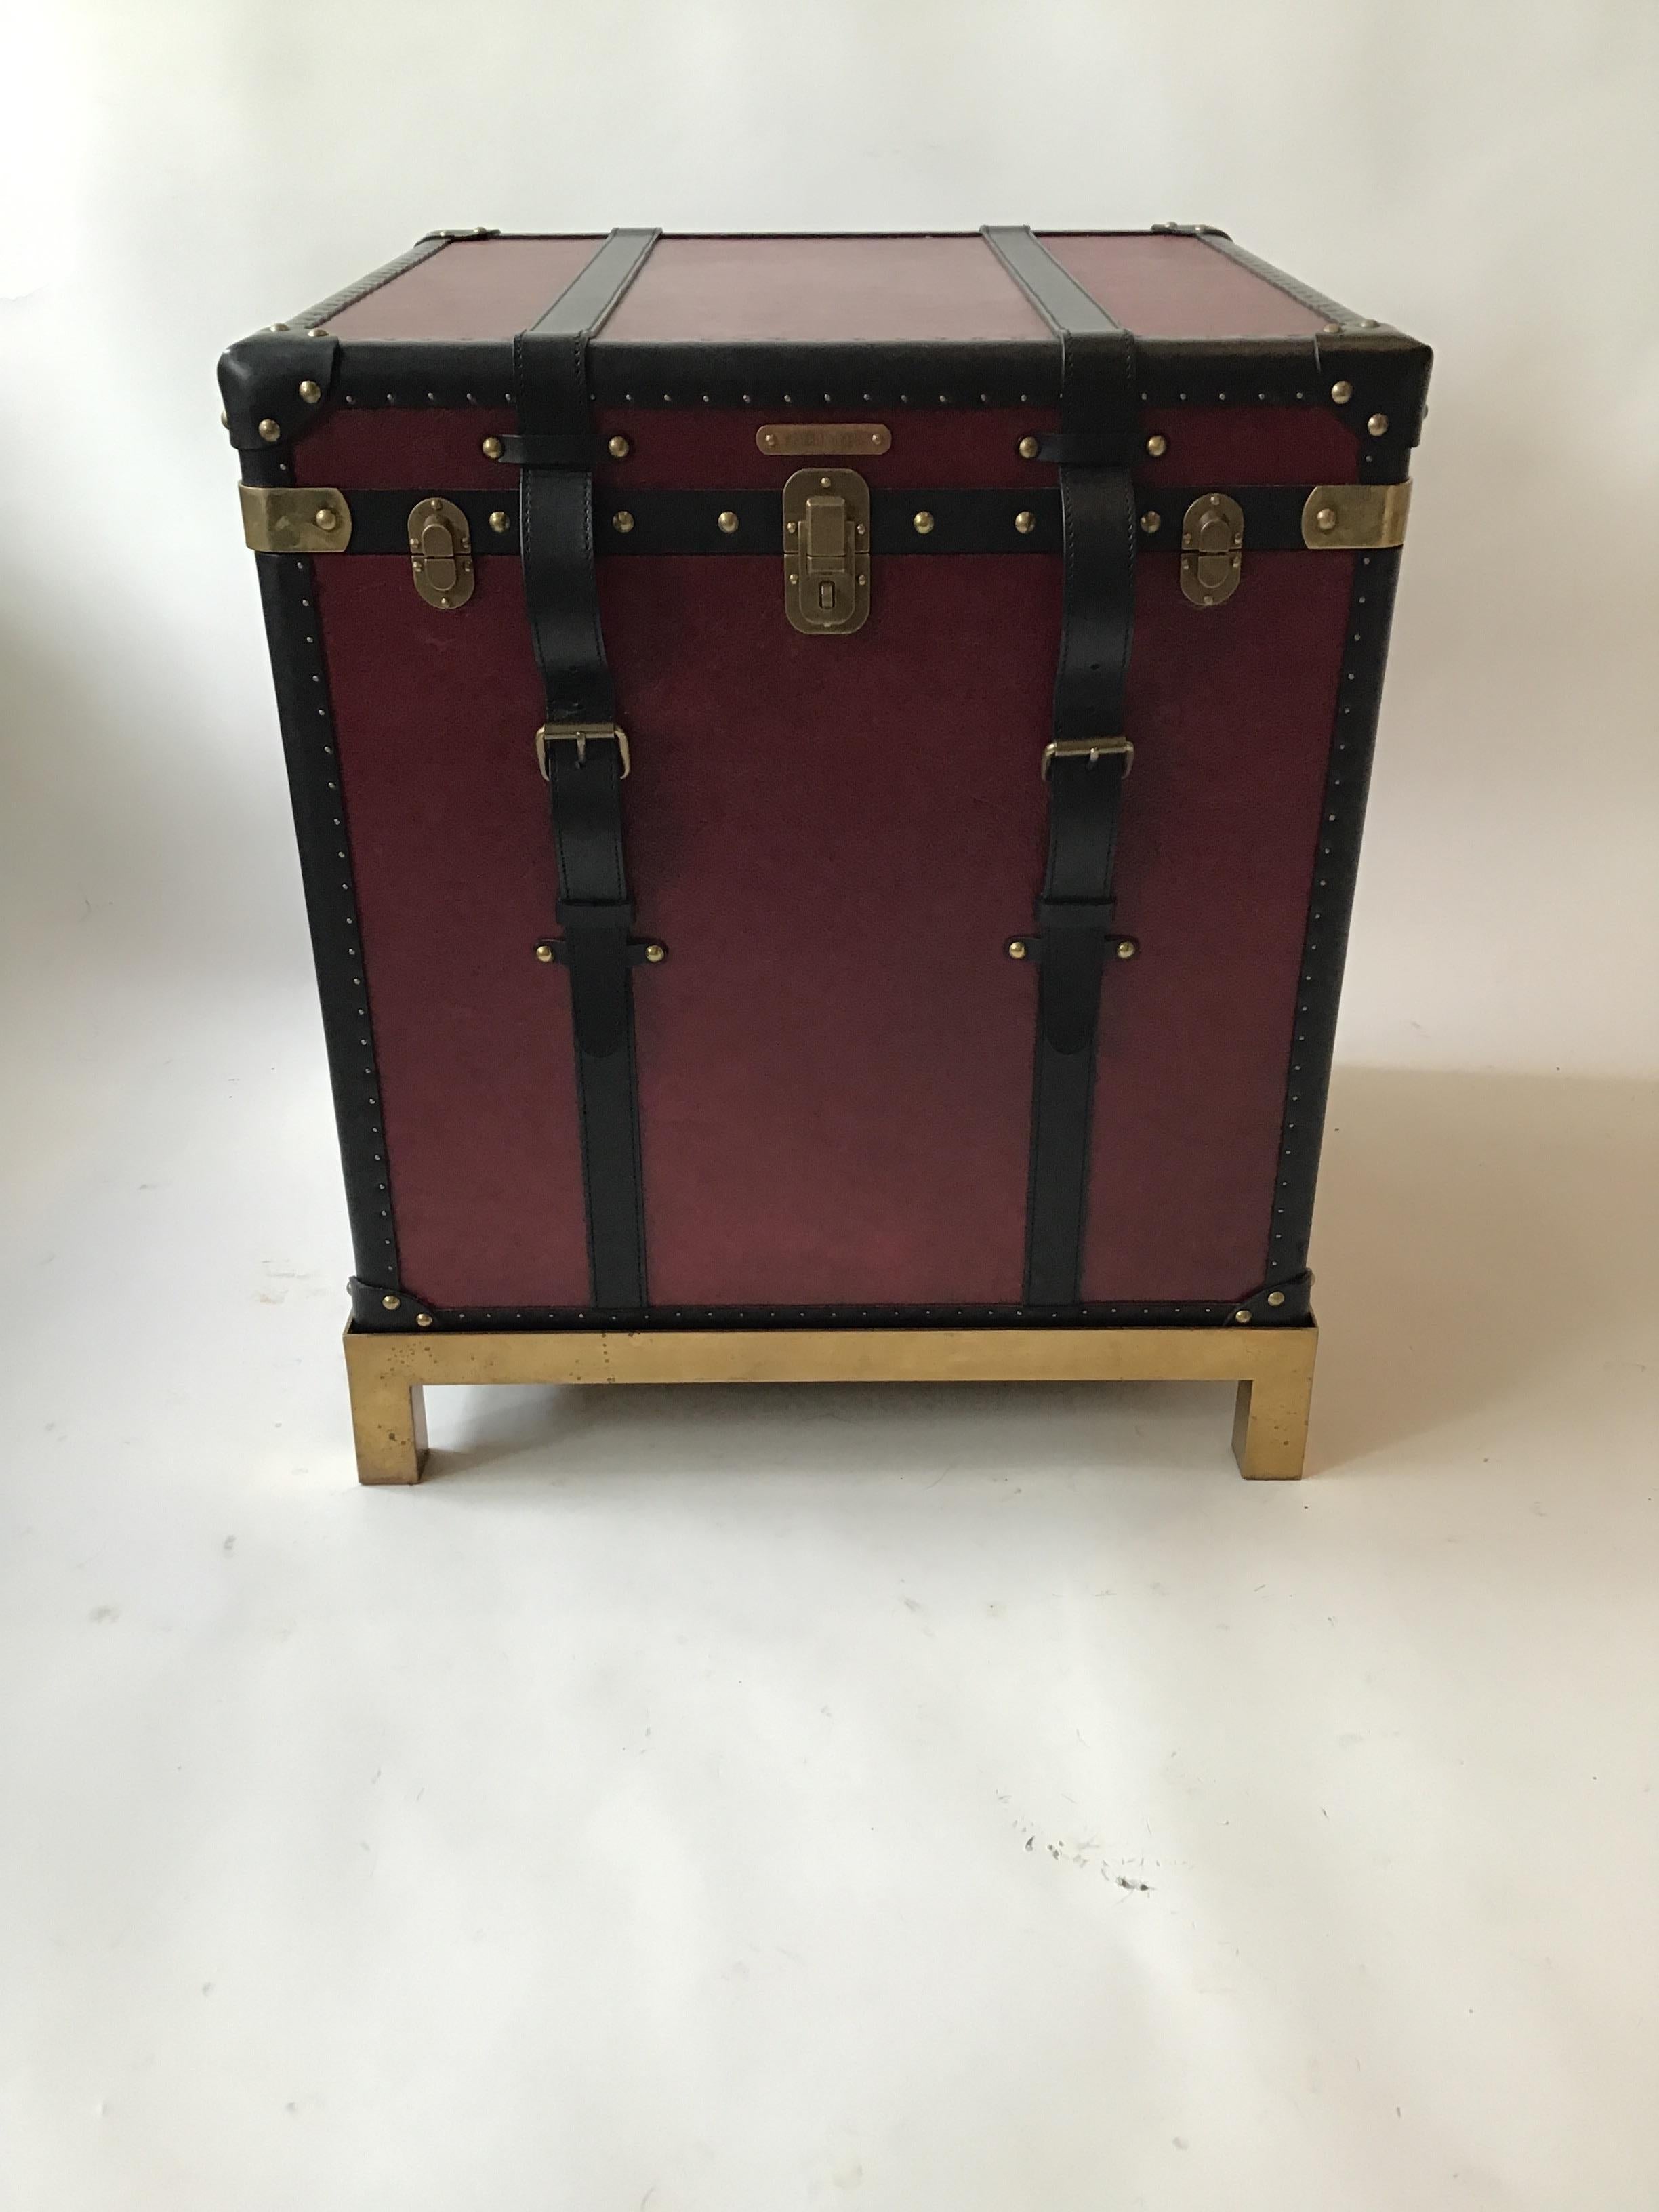 Ralph Lauren Oxford red leather trunk table on solid brass base. From a Southampton, NY estate. Leather trunk, top opens for storage.